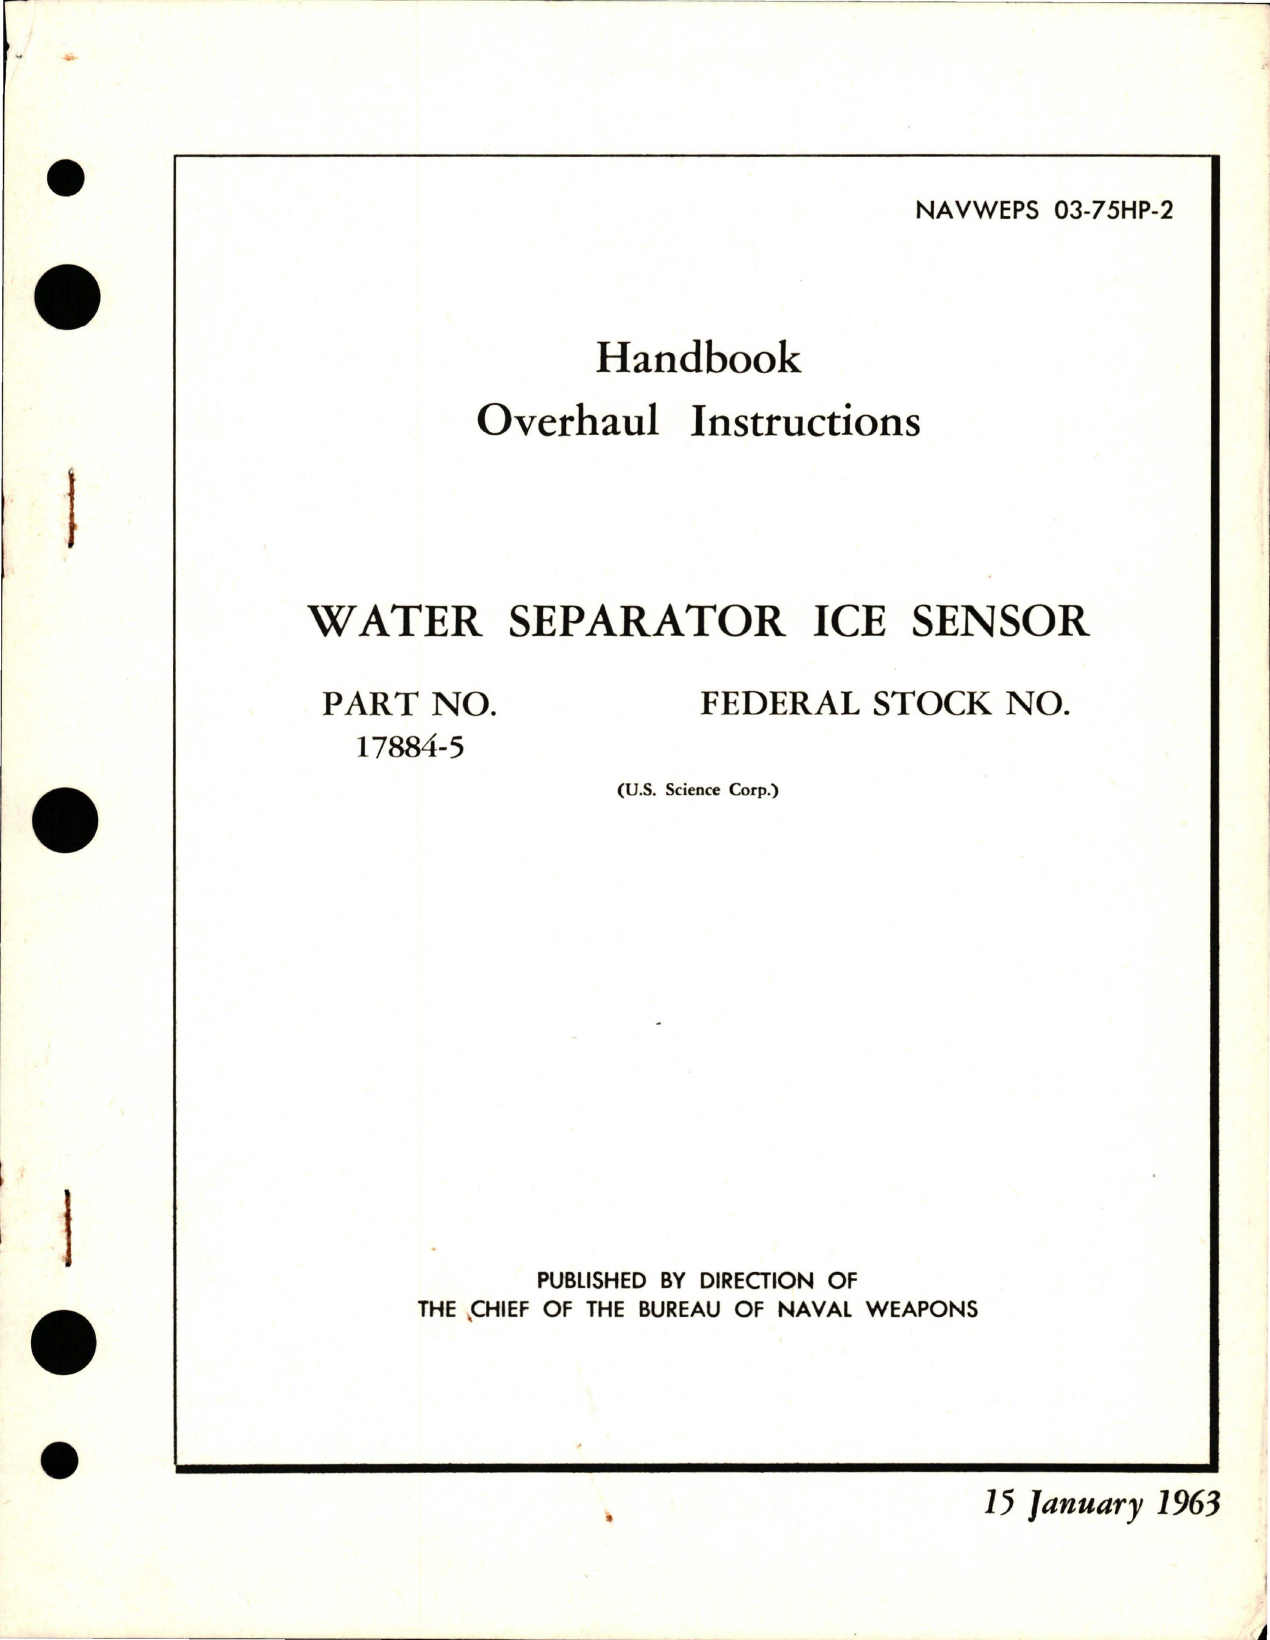 Sample page 1 from AirCorps Library document: Overhaul Instructions for Water Separator Ice Sensor - Part 17884-5